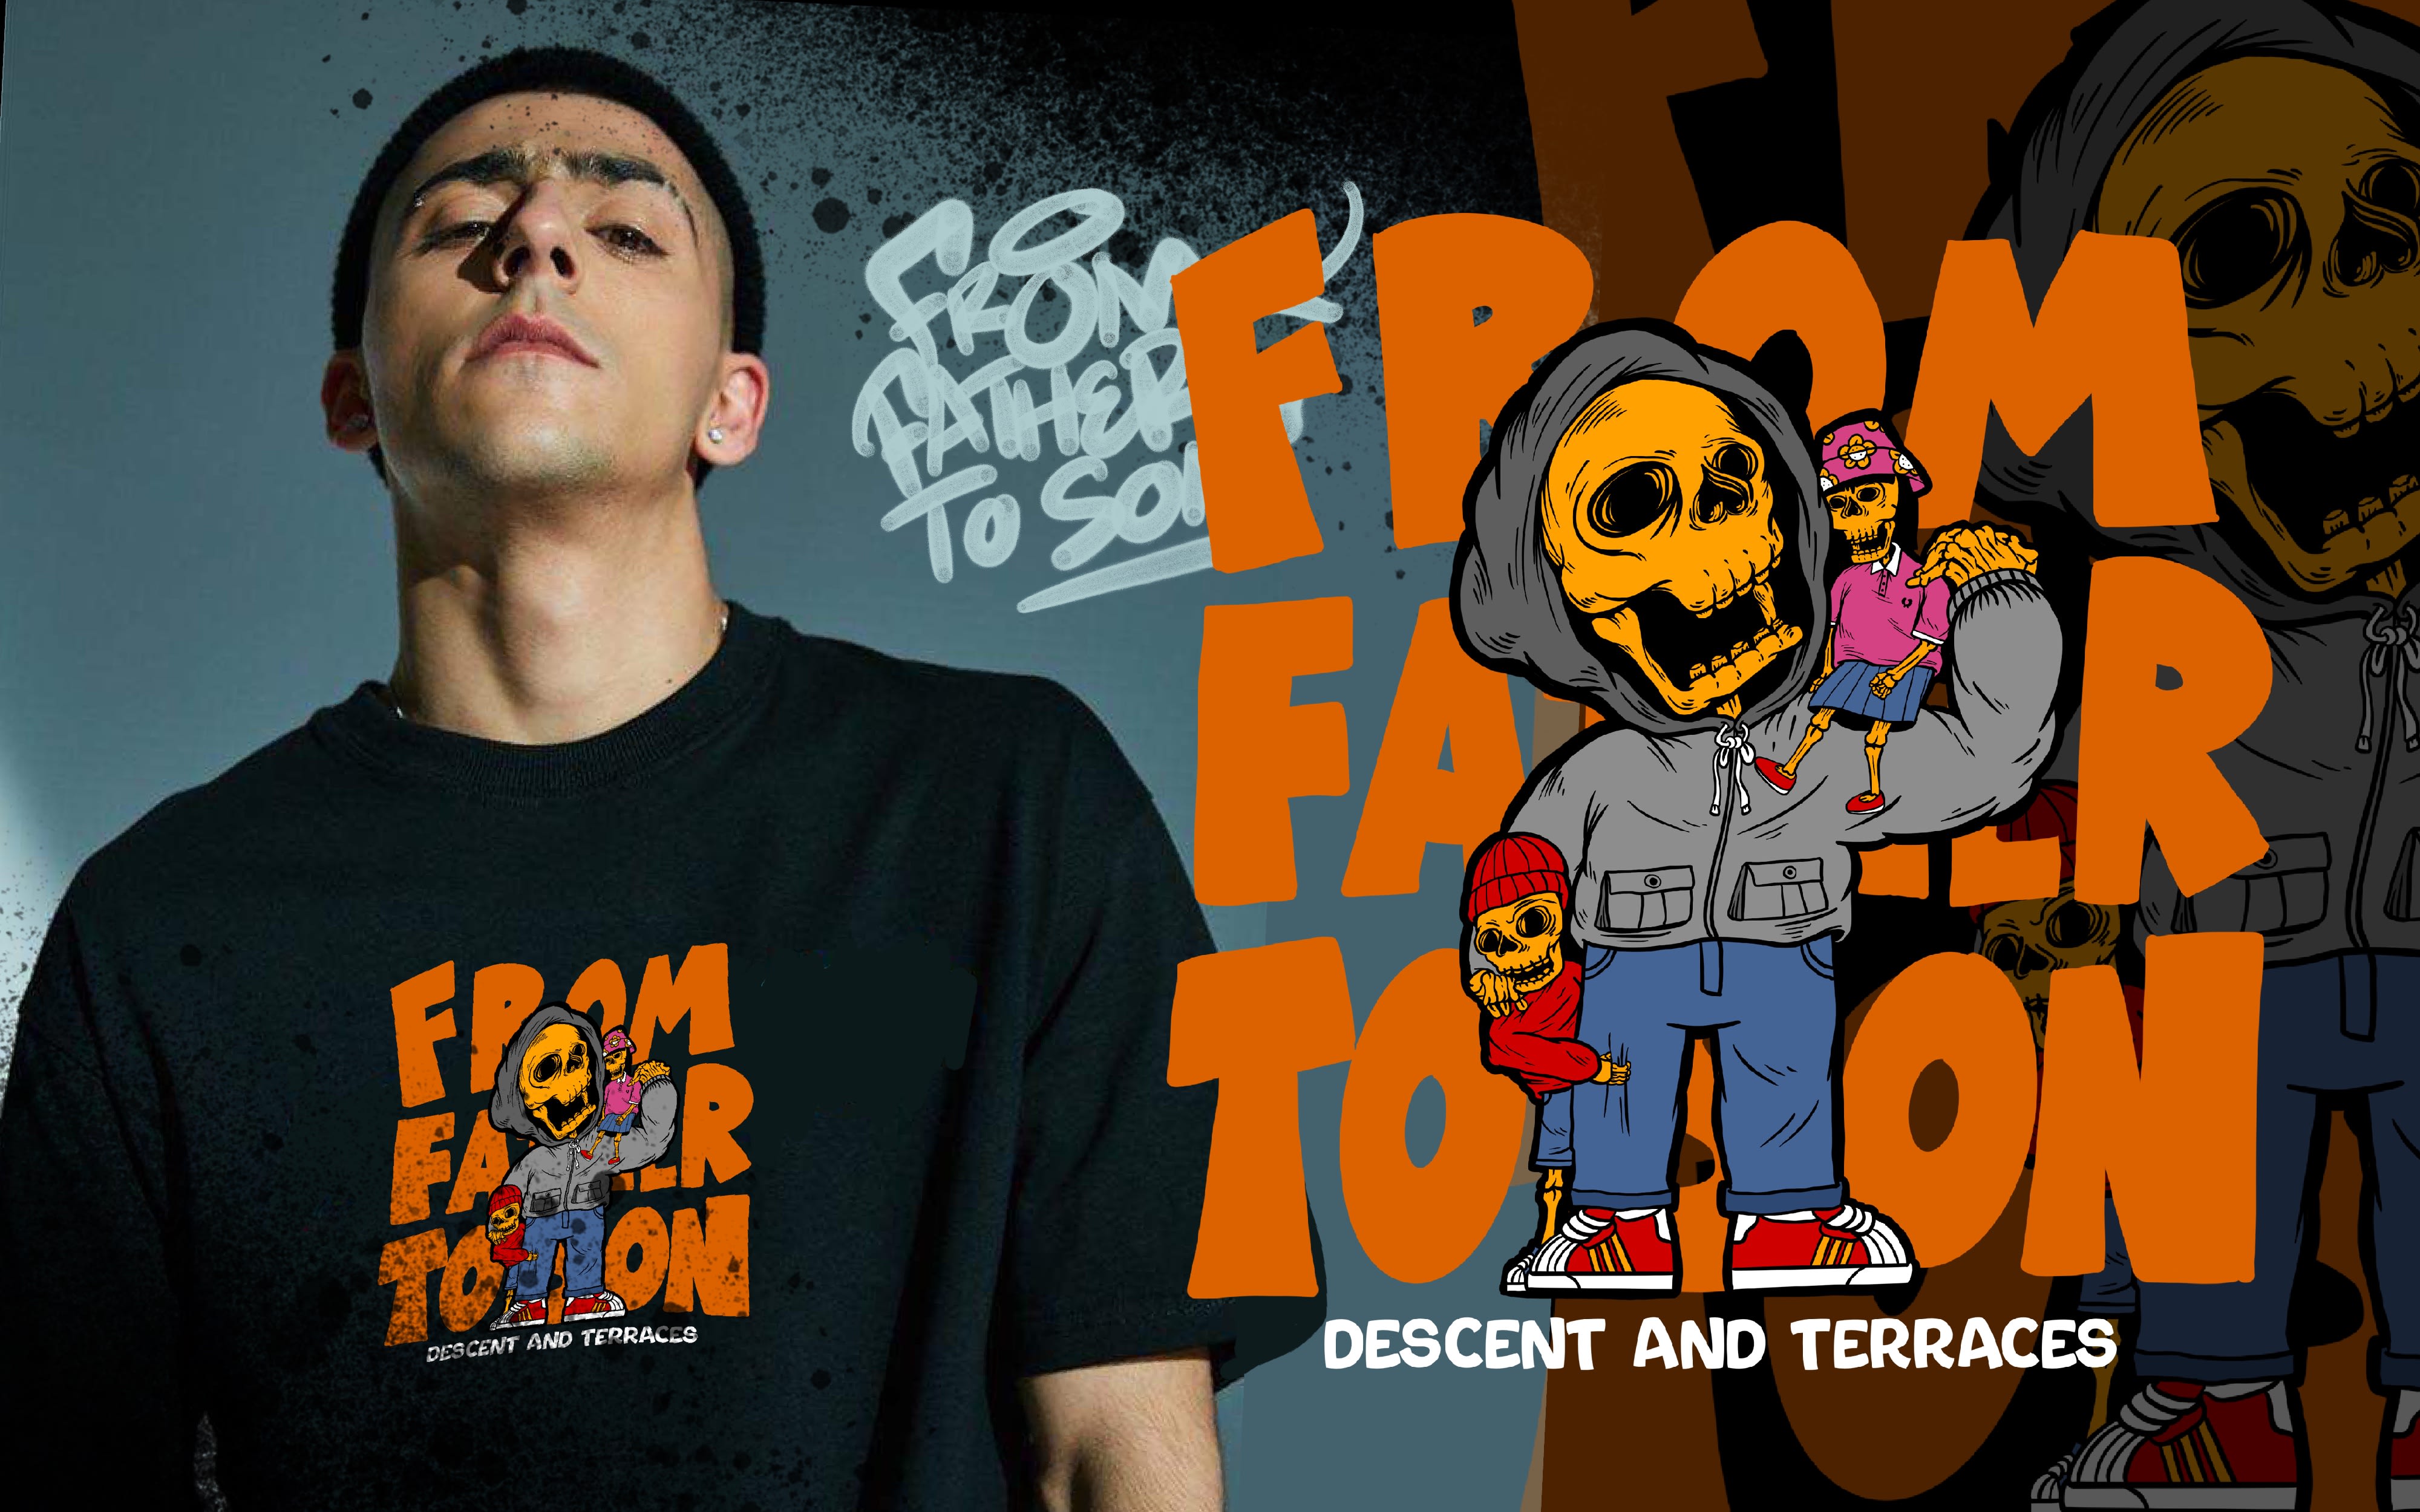 Draw football fans cartoon for clothing and merchindise by Yudaprasetiya |  Fiverr